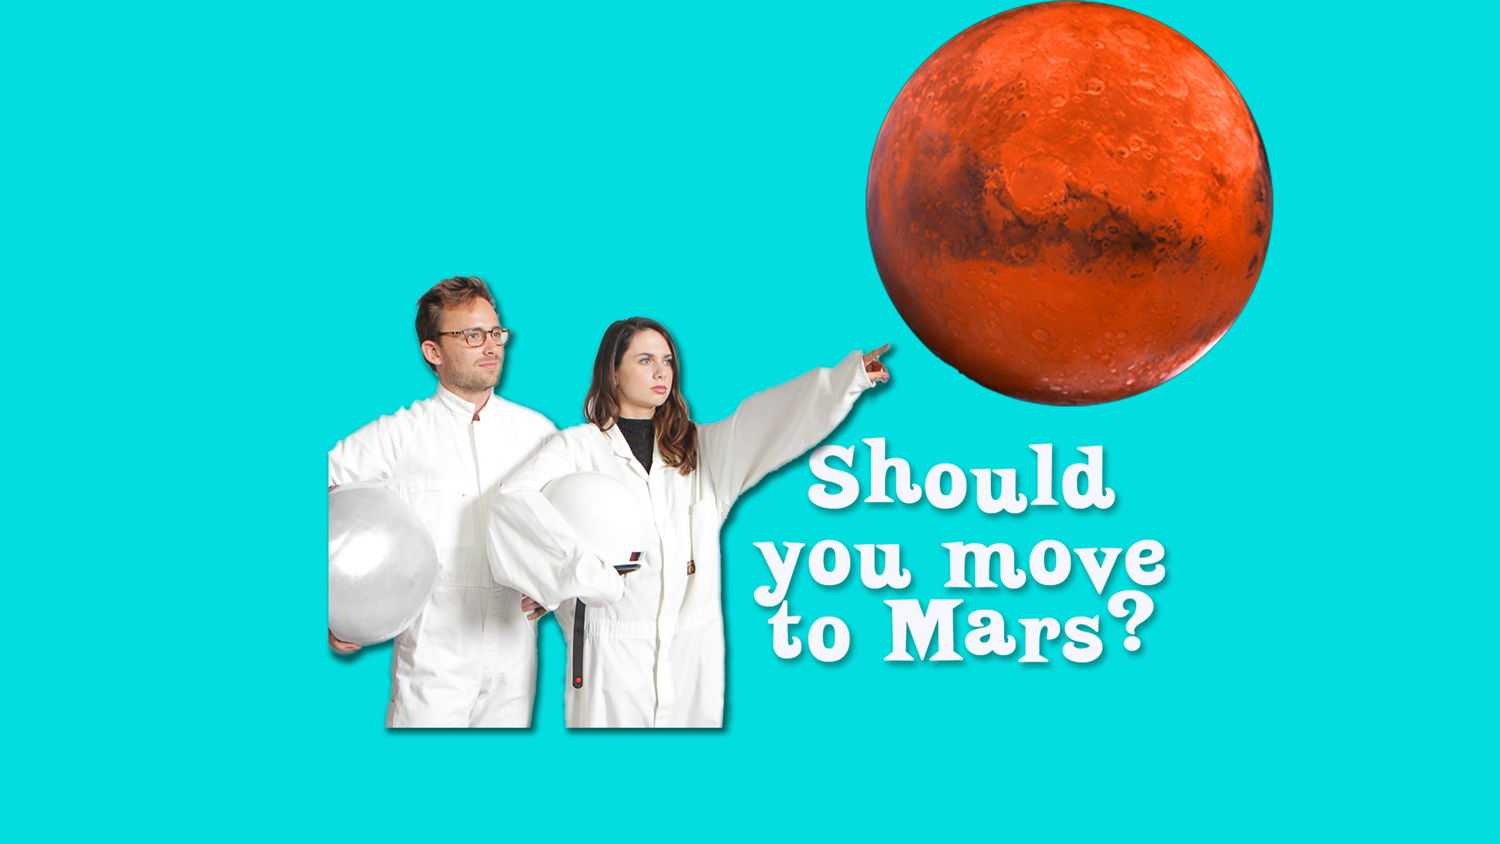 Should we move to Mars?